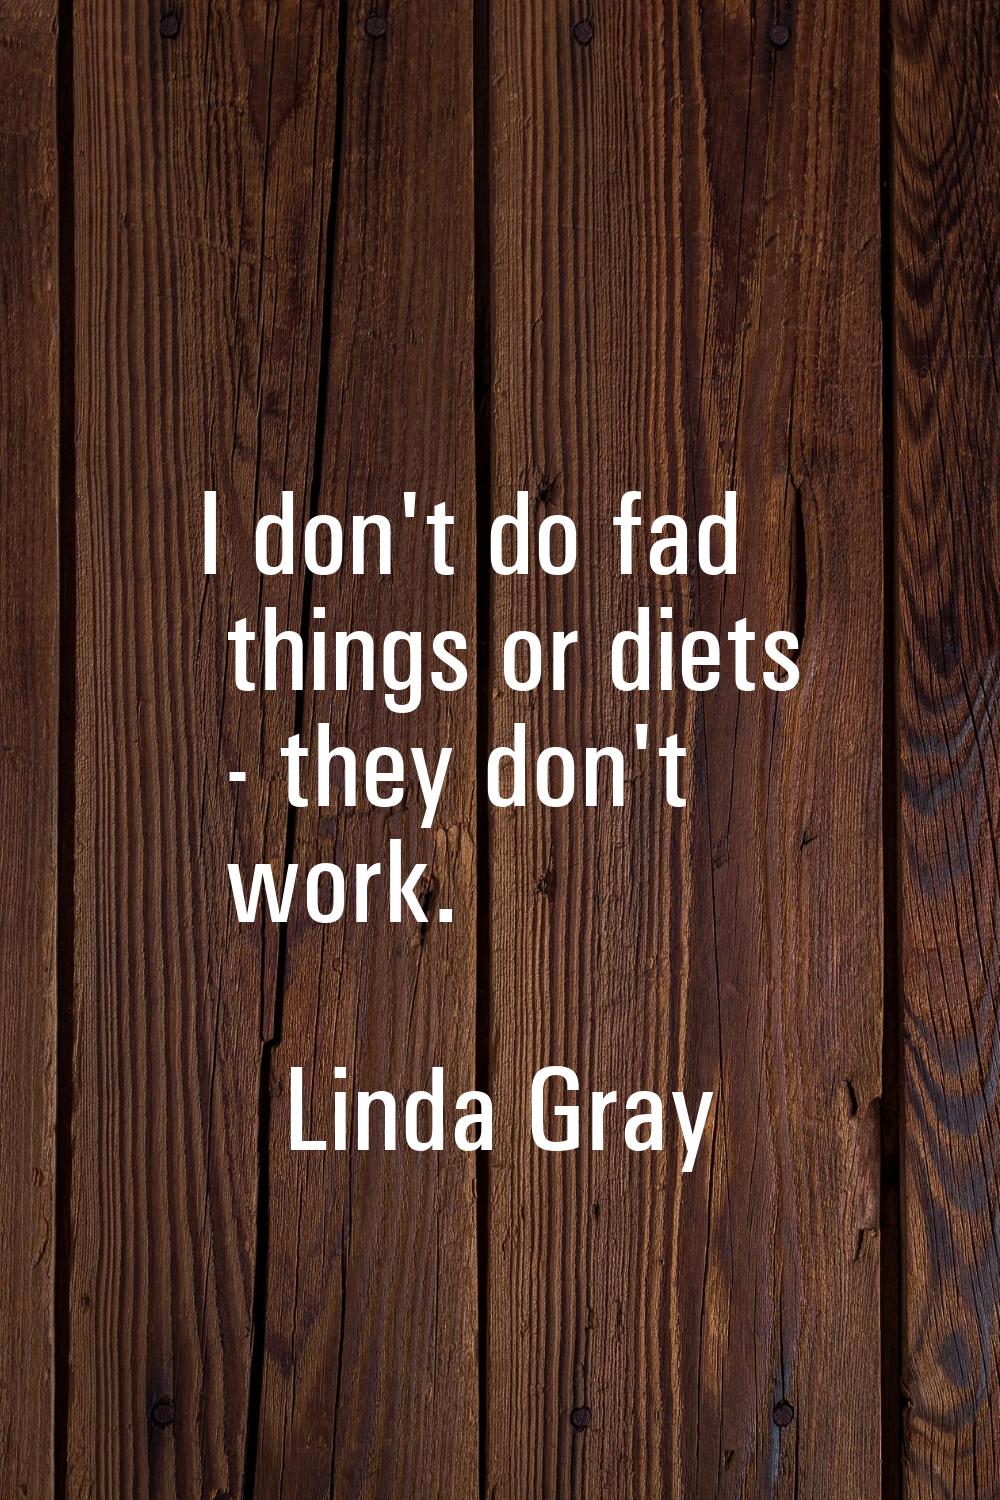 I don't do fad things or diets - they don't work.